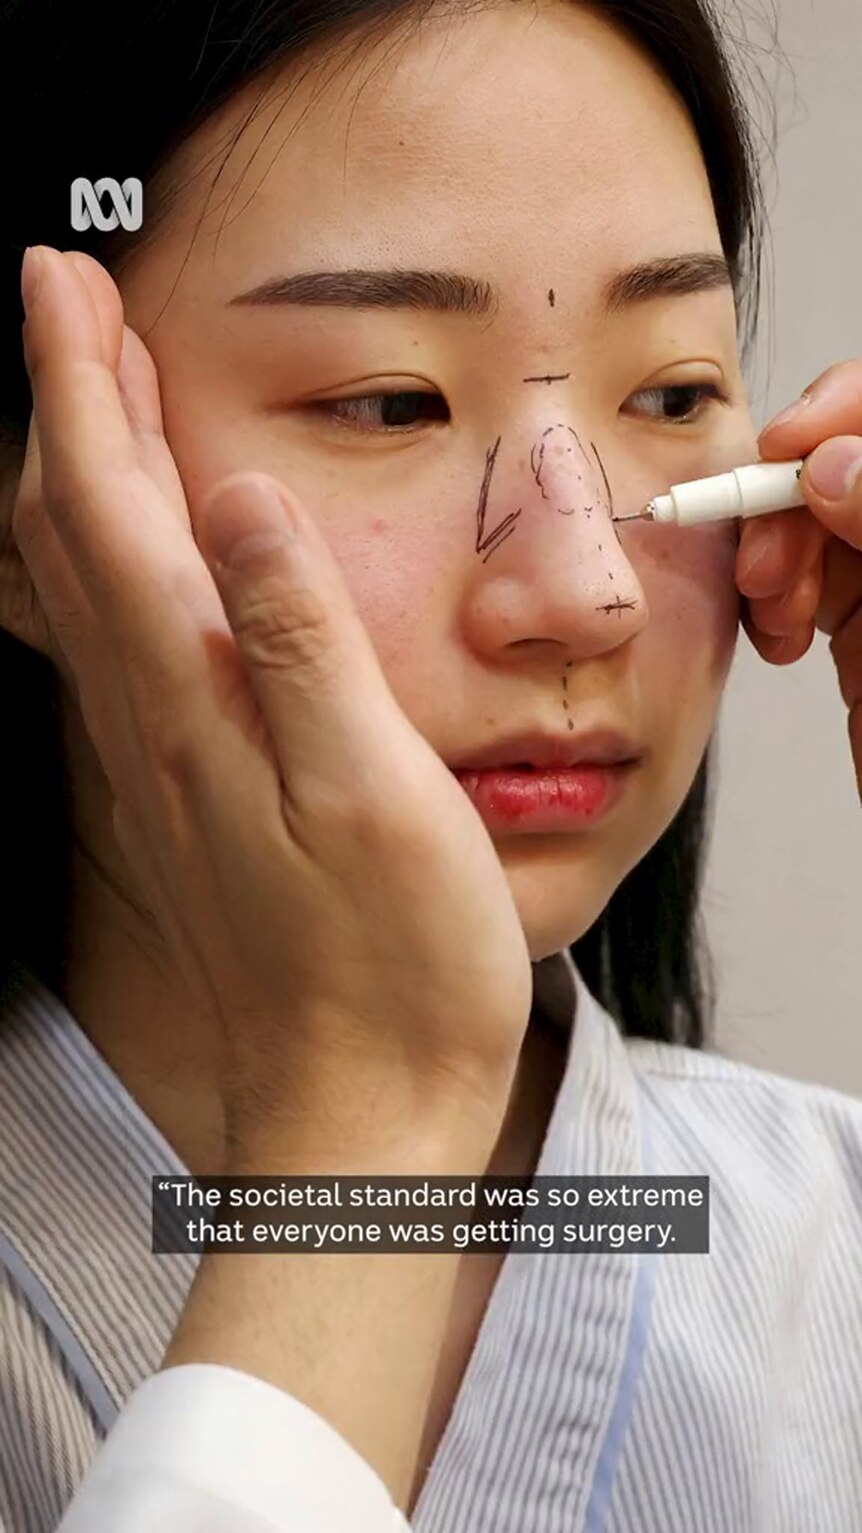 A young Asian woman has markings drawn on her face by hands with a skin tone that matches hers